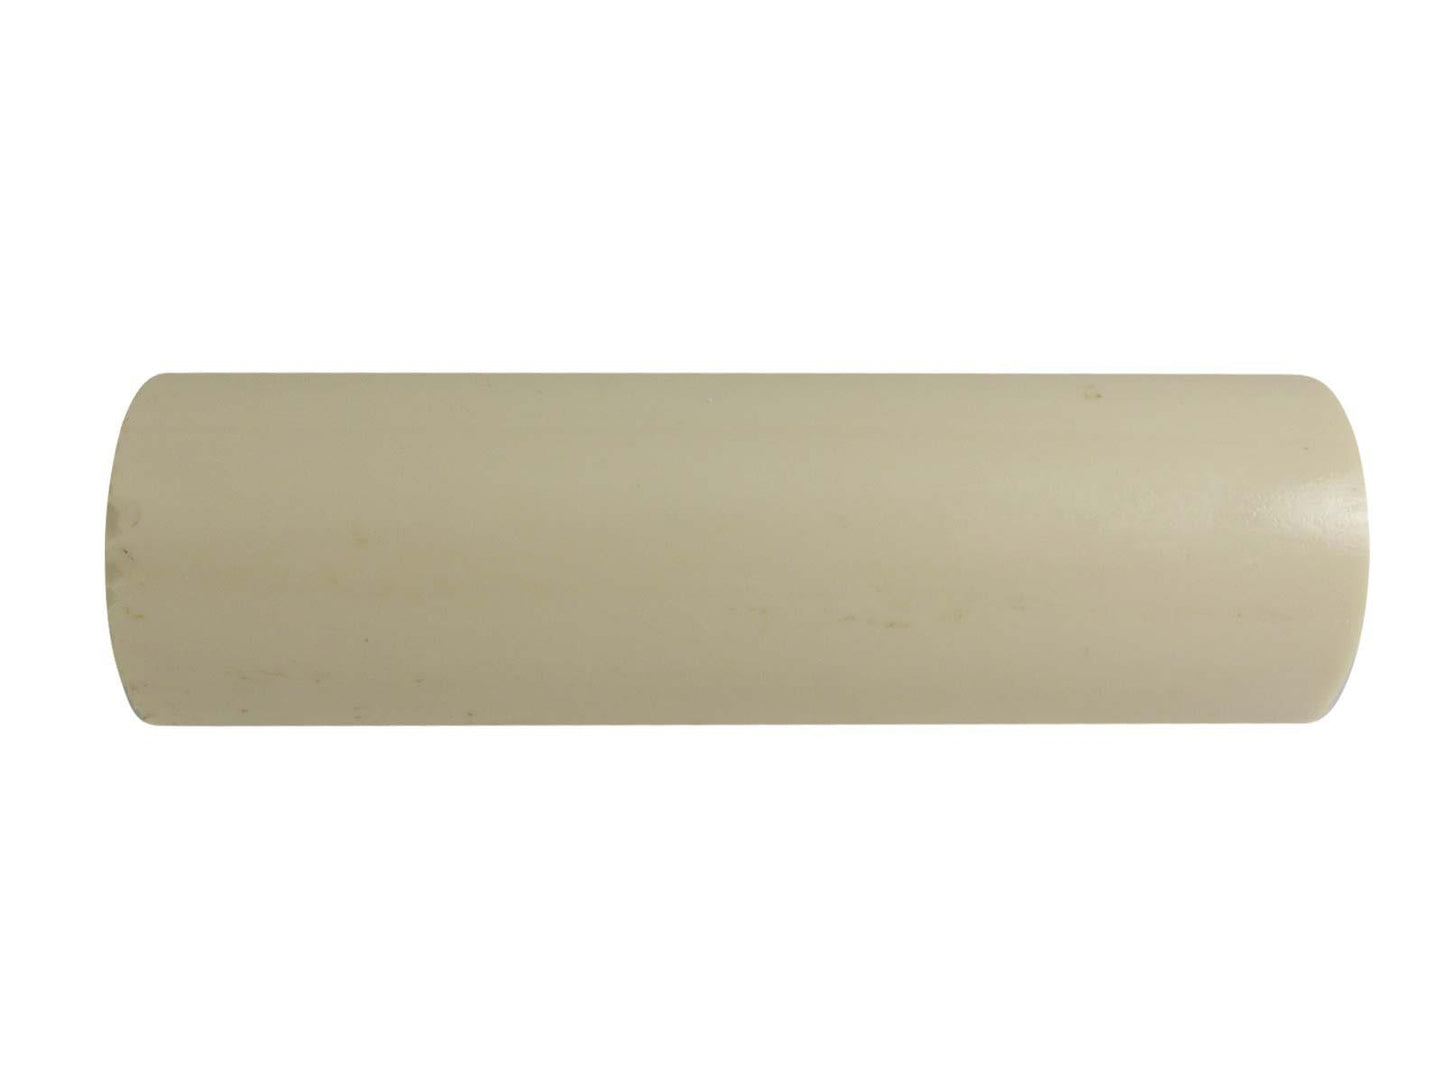 Turners' Mill Ivory Polyester Turning Blank - 152.4x50x50mm (6x1.97x1.97")